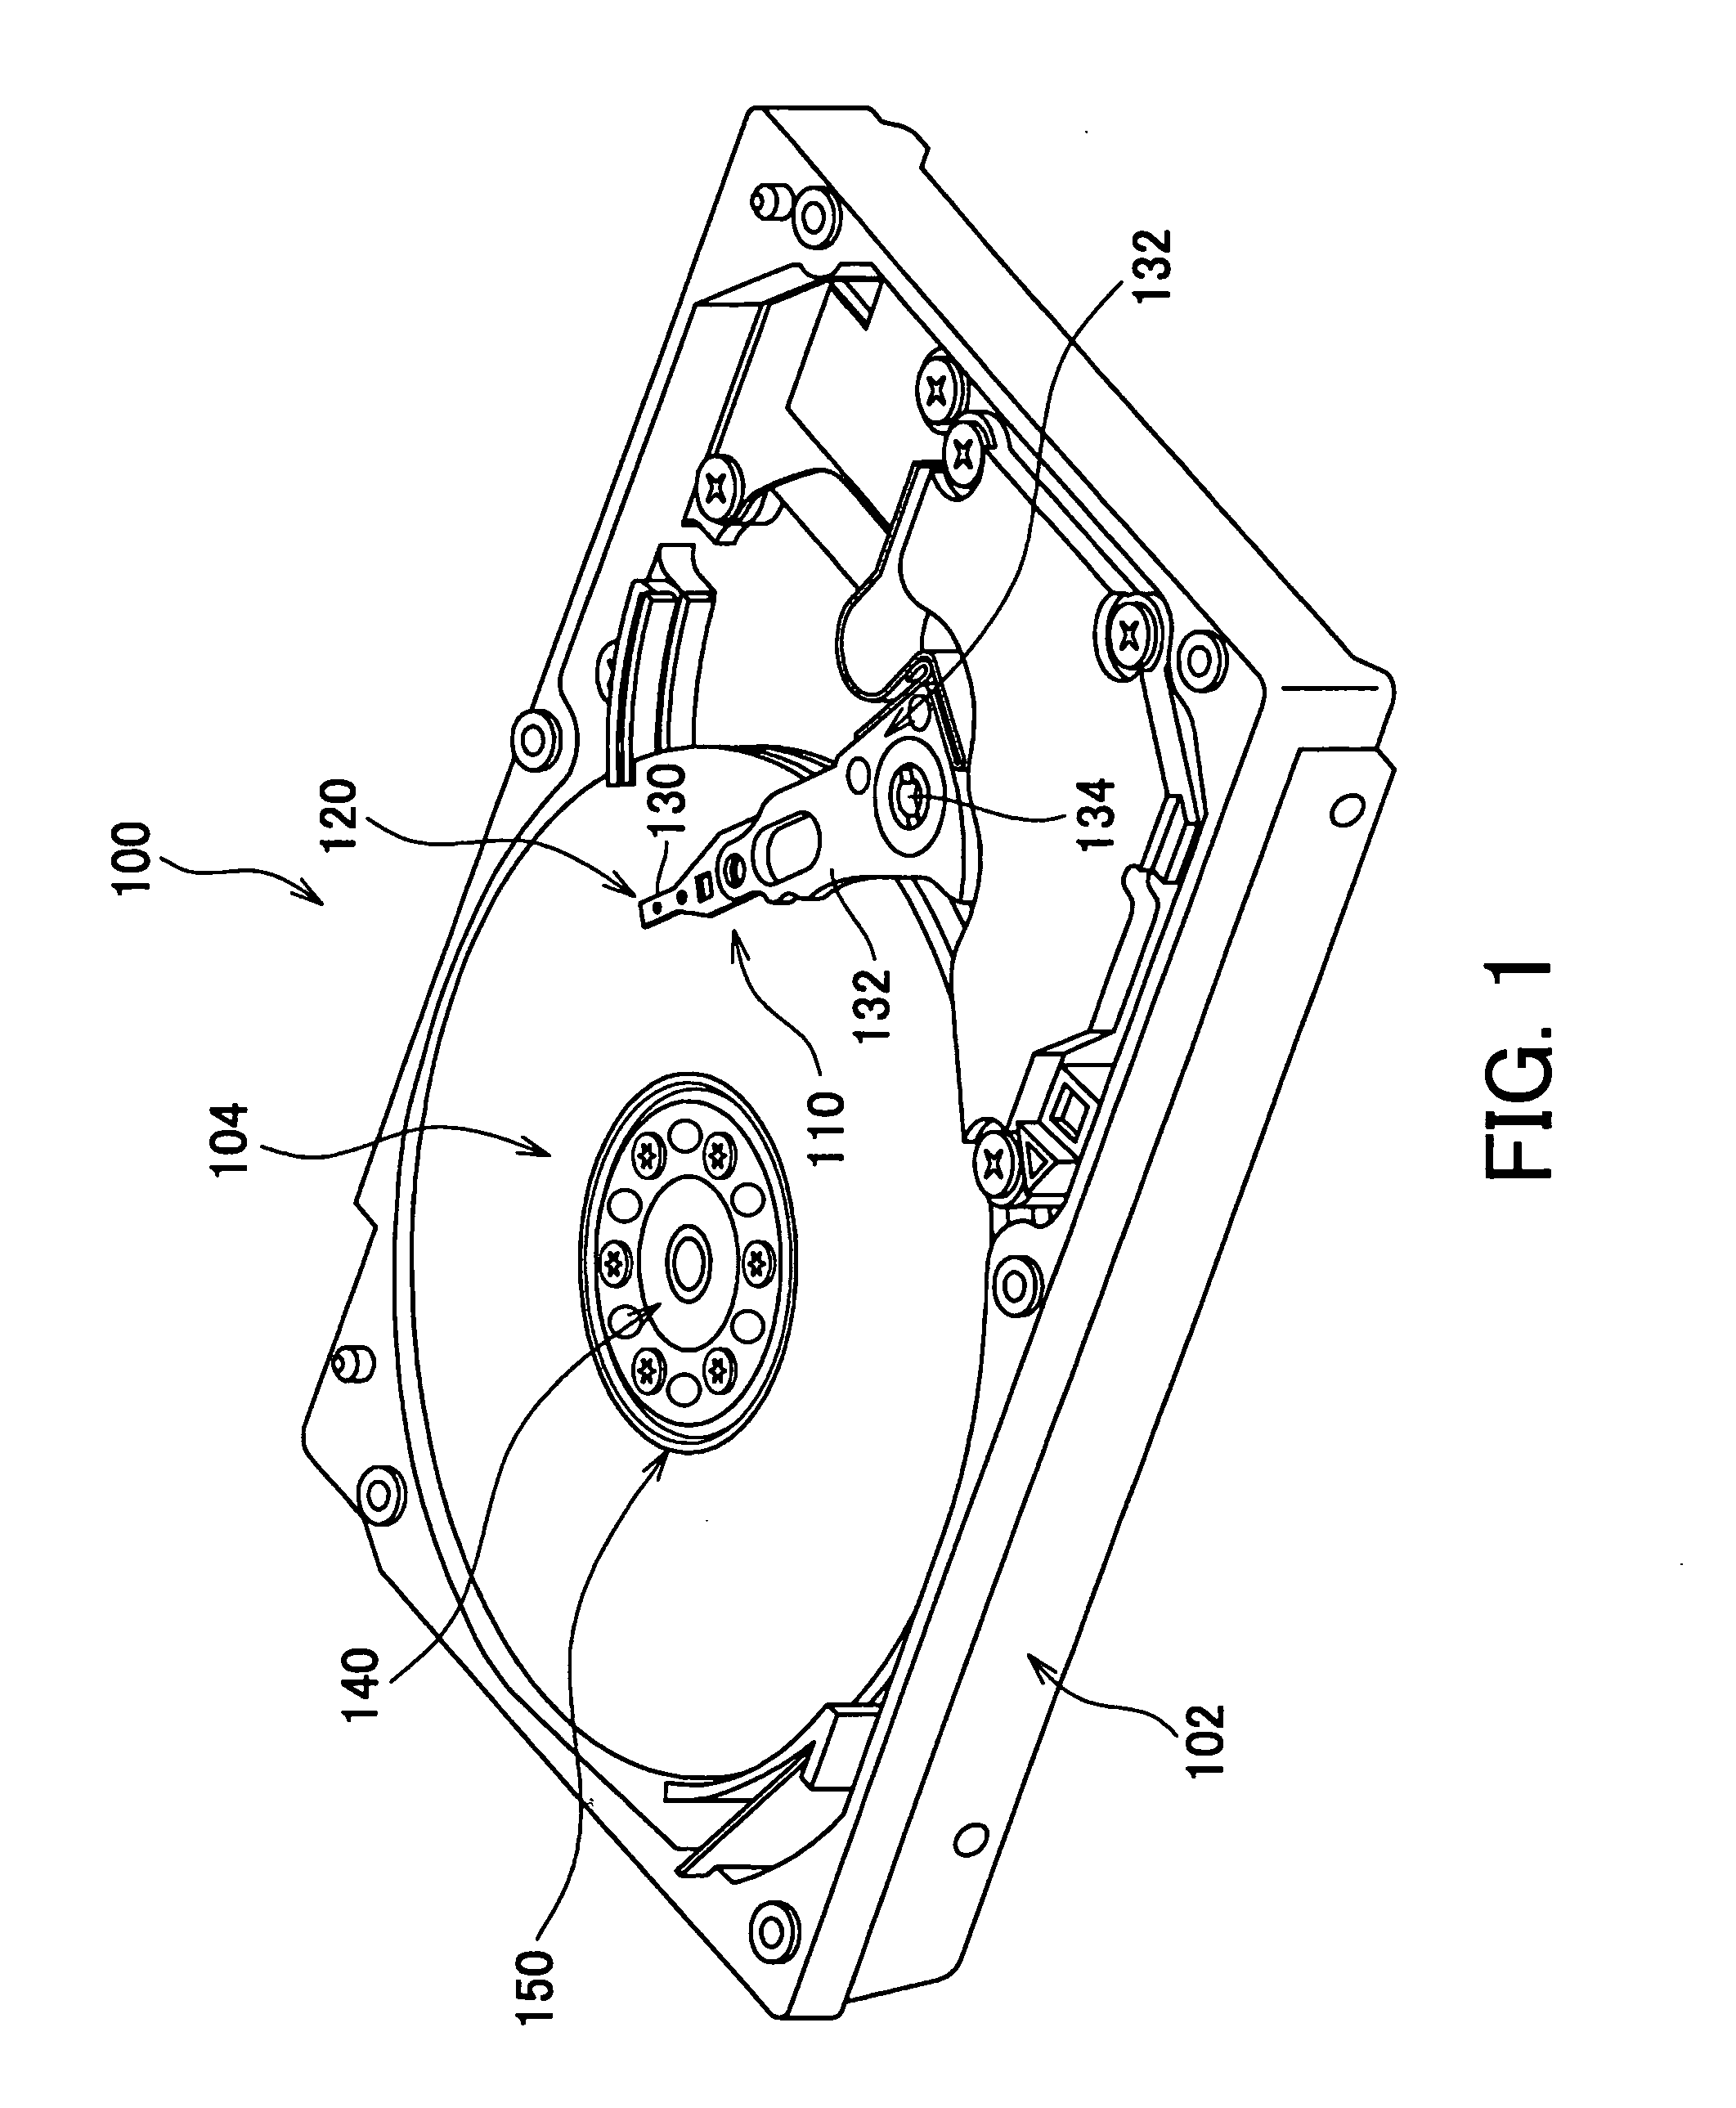 Clamp ring and disc drive having the same